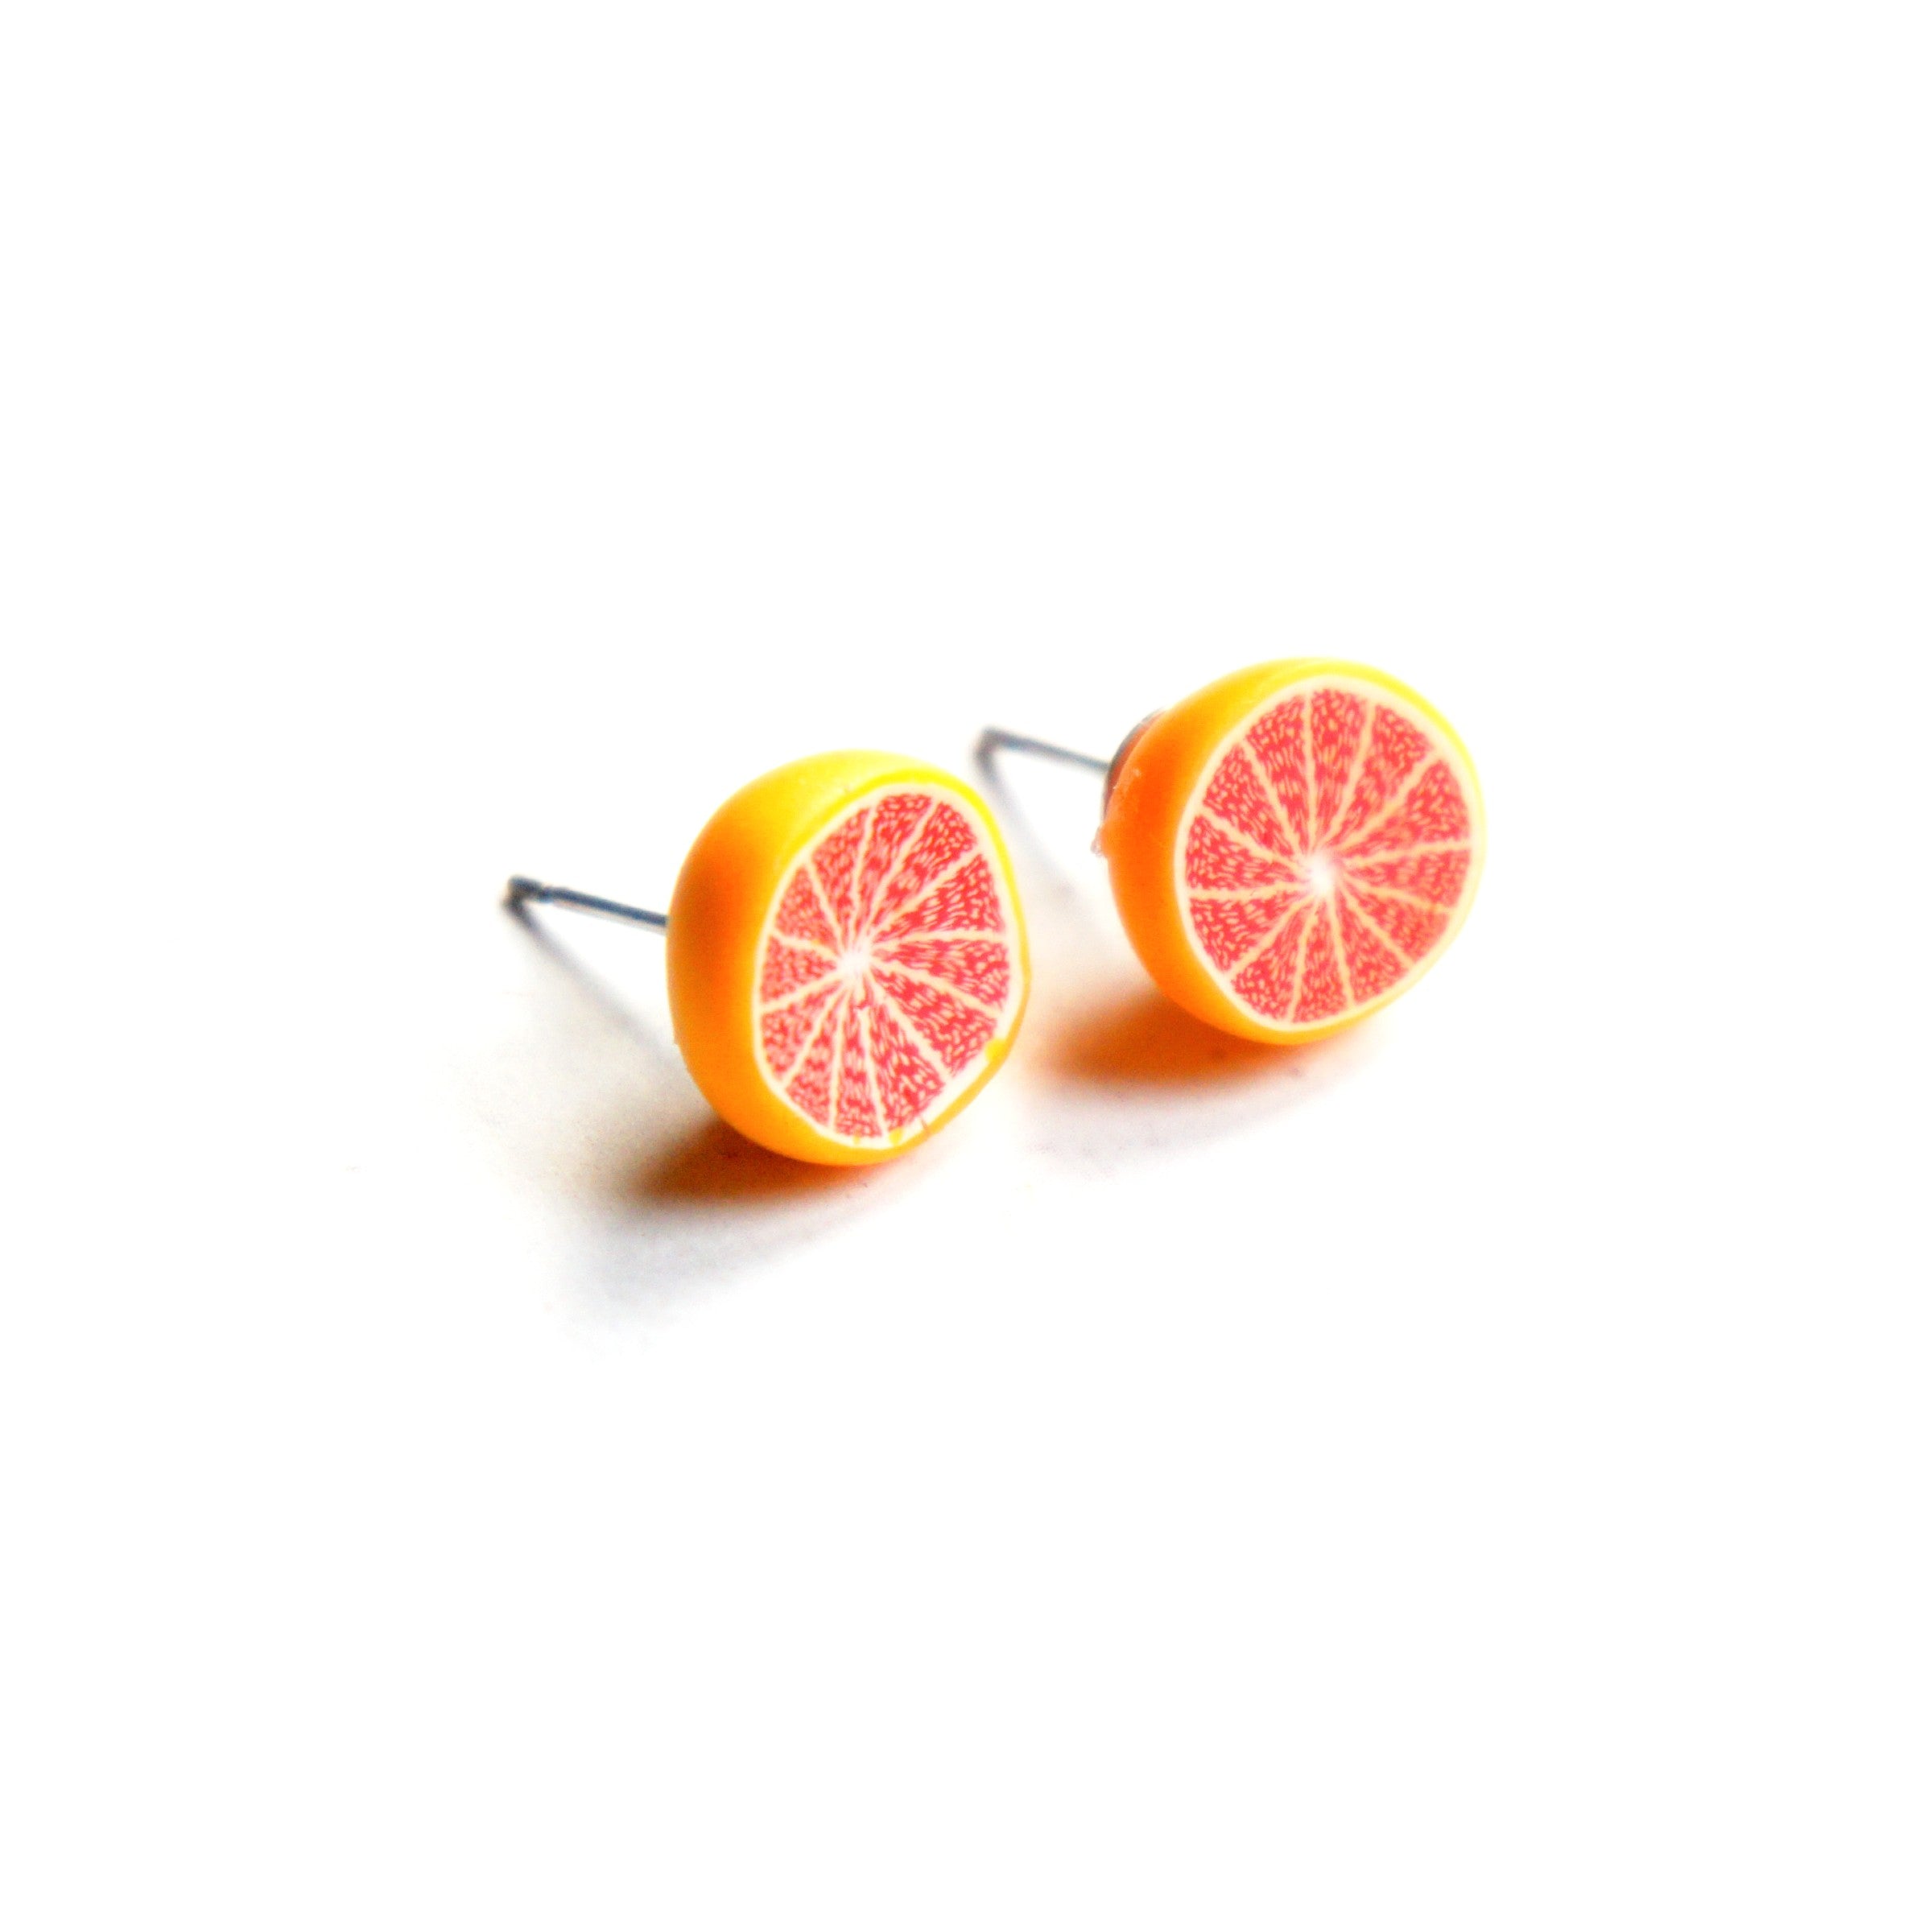 Grapefruit Stud Earrings - Jillicious charms and accessories